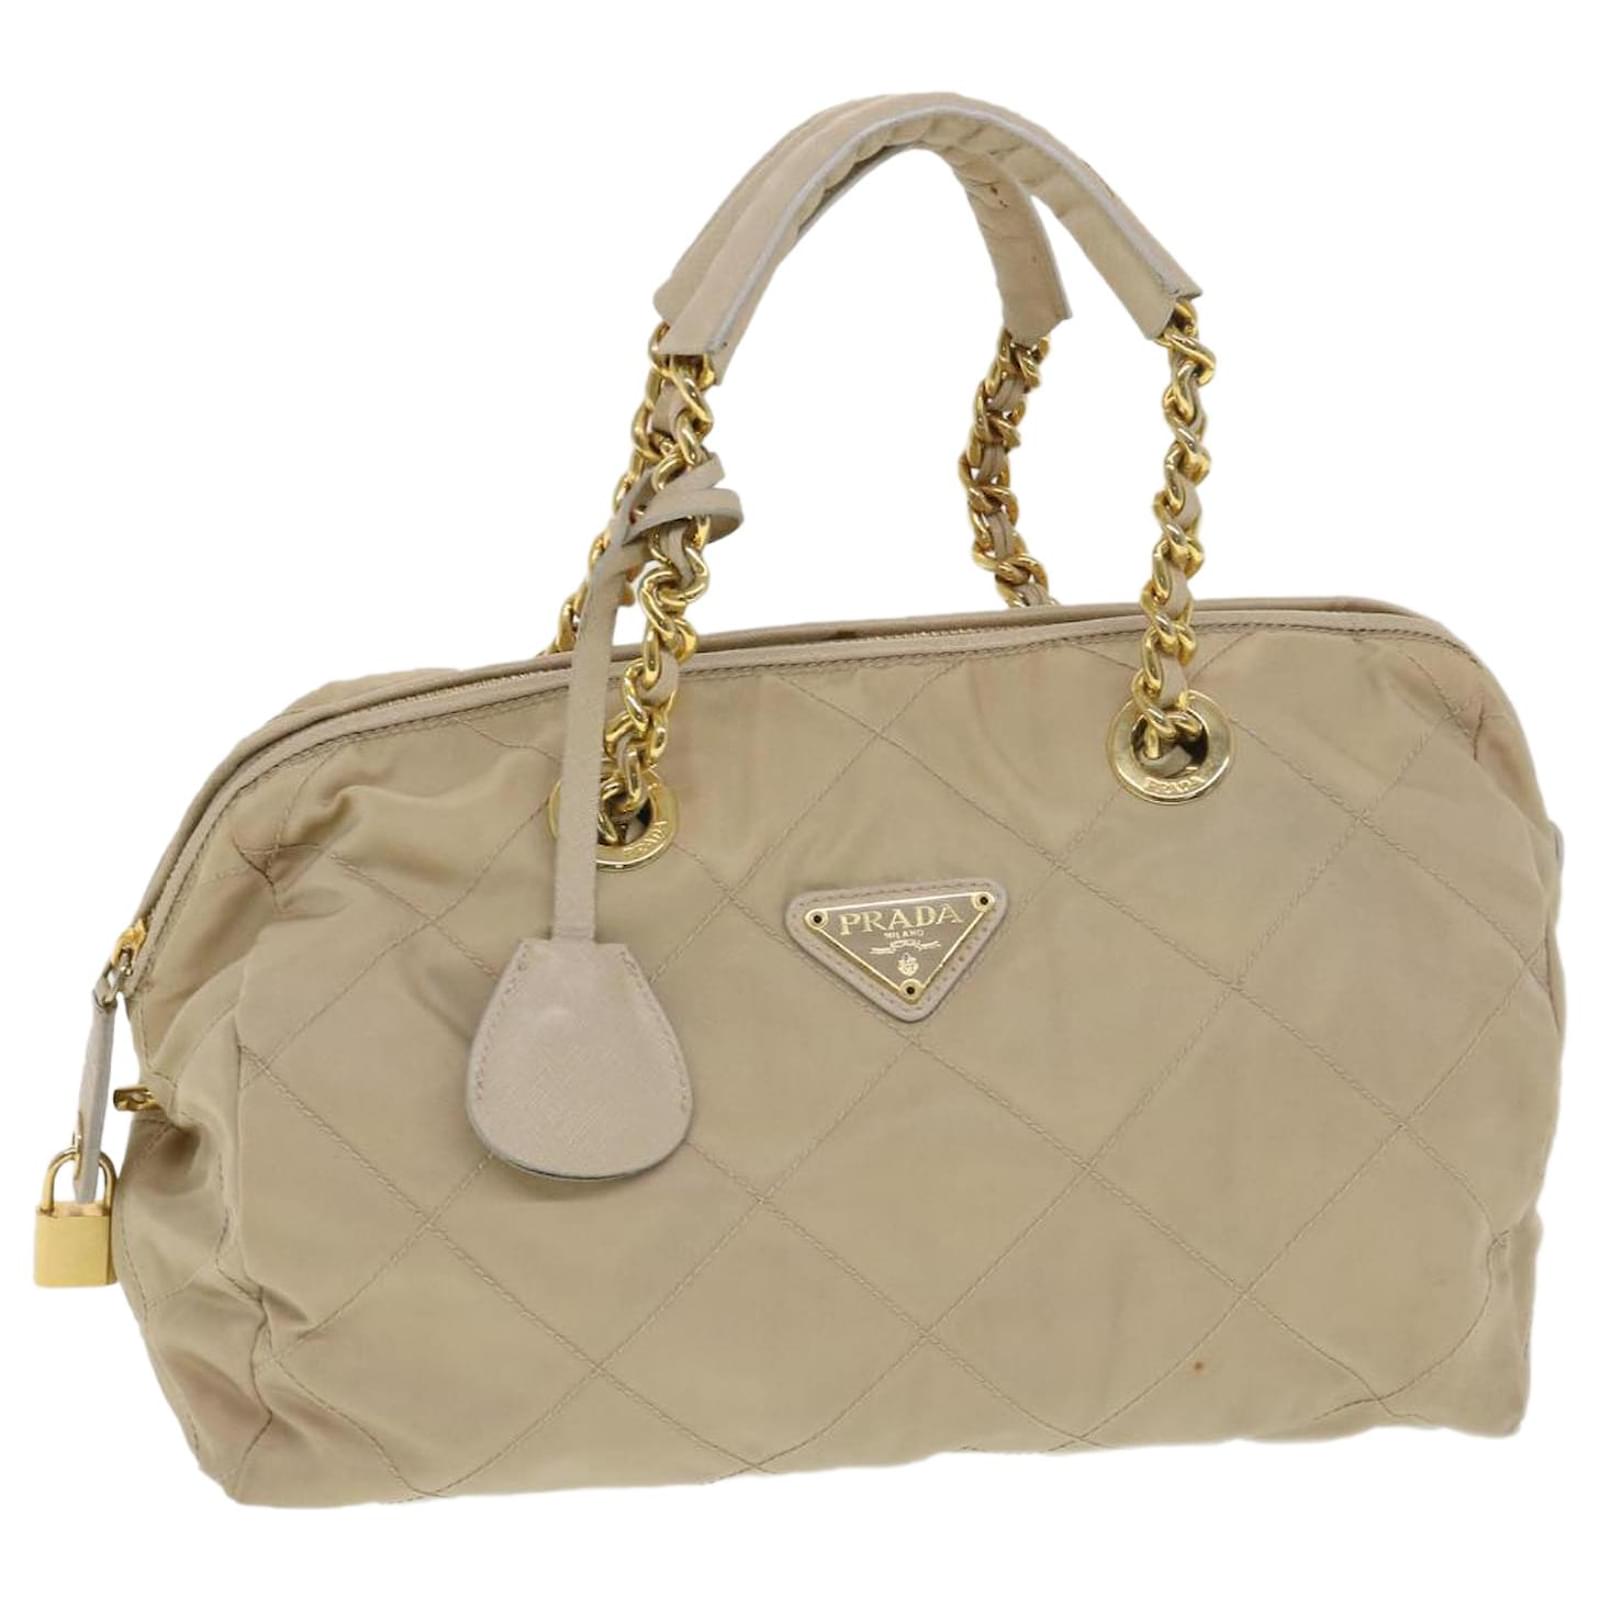 Authentic Prada Beige Leather Clutch With Optional Gold Chain